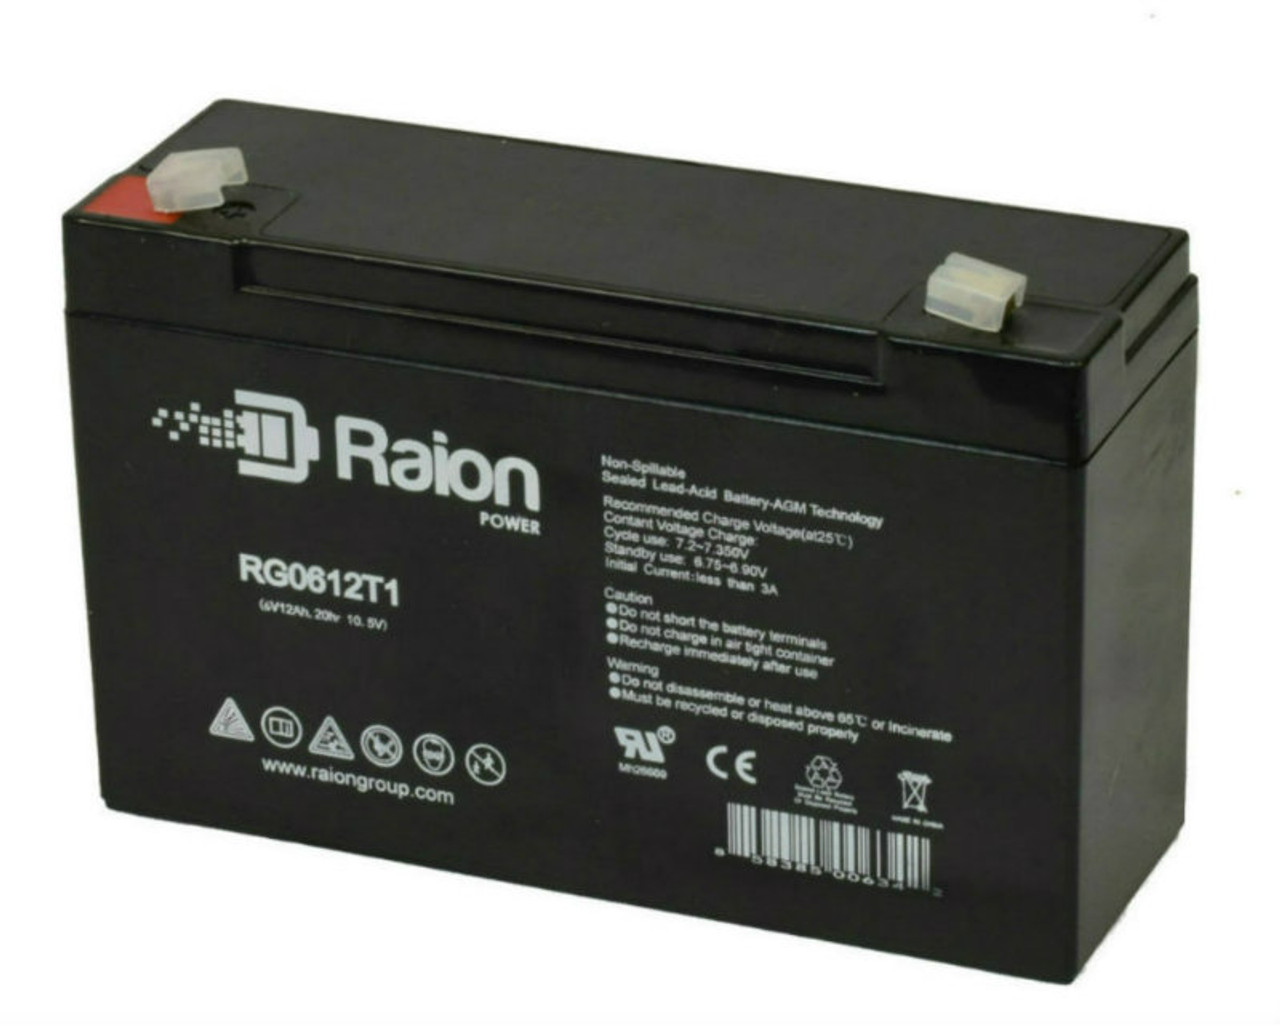 Raion Power RG06120T1 Replacement 6V 12Ah Emergency Light Battery for Sure-Lites RD3